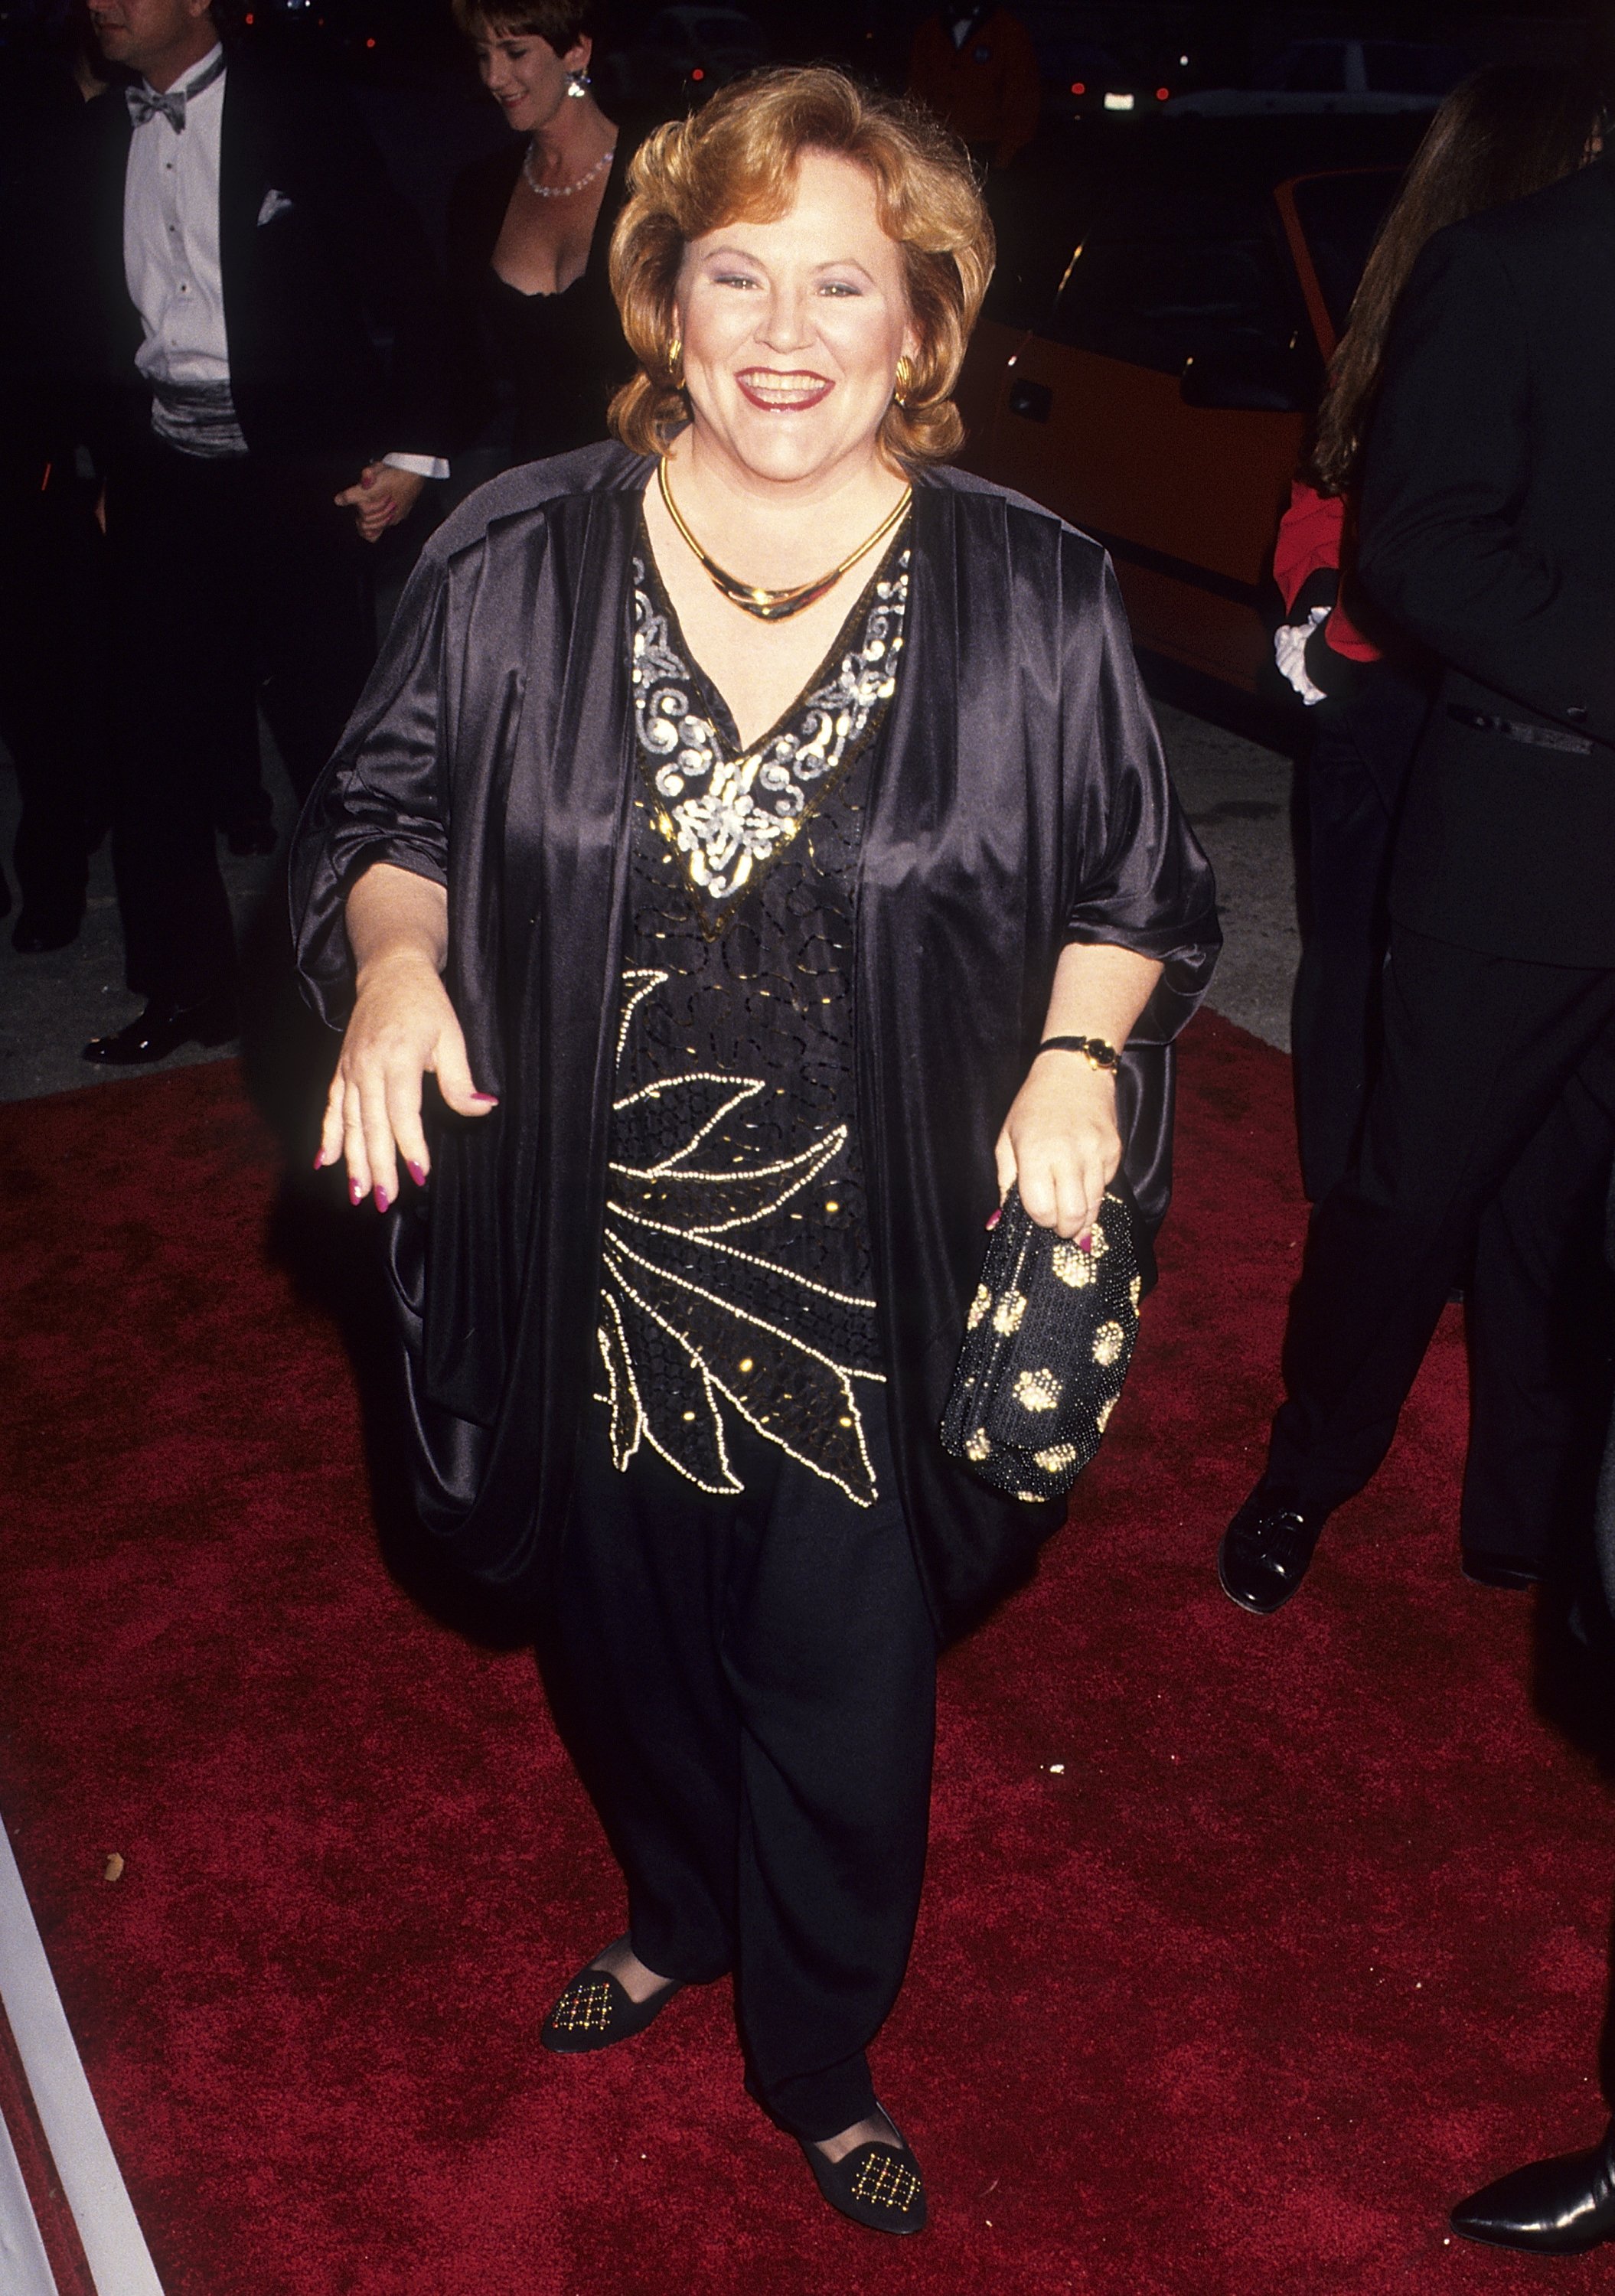 Actress Edie McClurg attends the Fifth Annual American Comedy Awards on March 9, 1991 at Shrine Exposition Center in Los Angeles, California. | Source: Getty Images